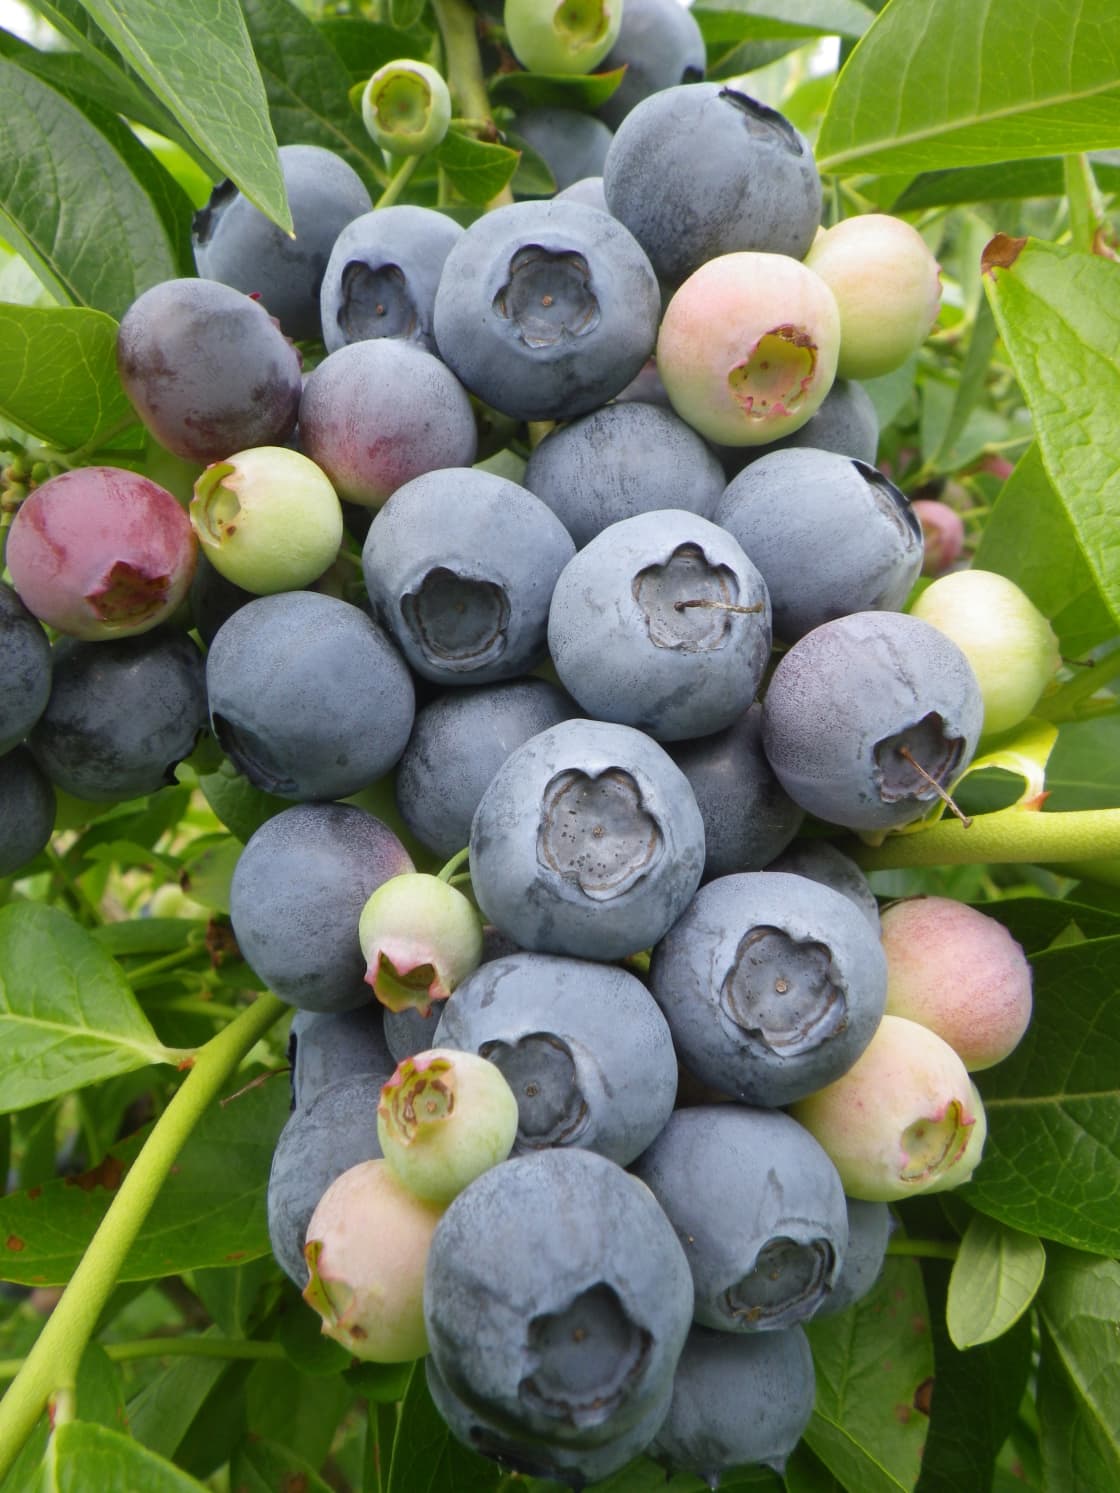 Awesome blueberries